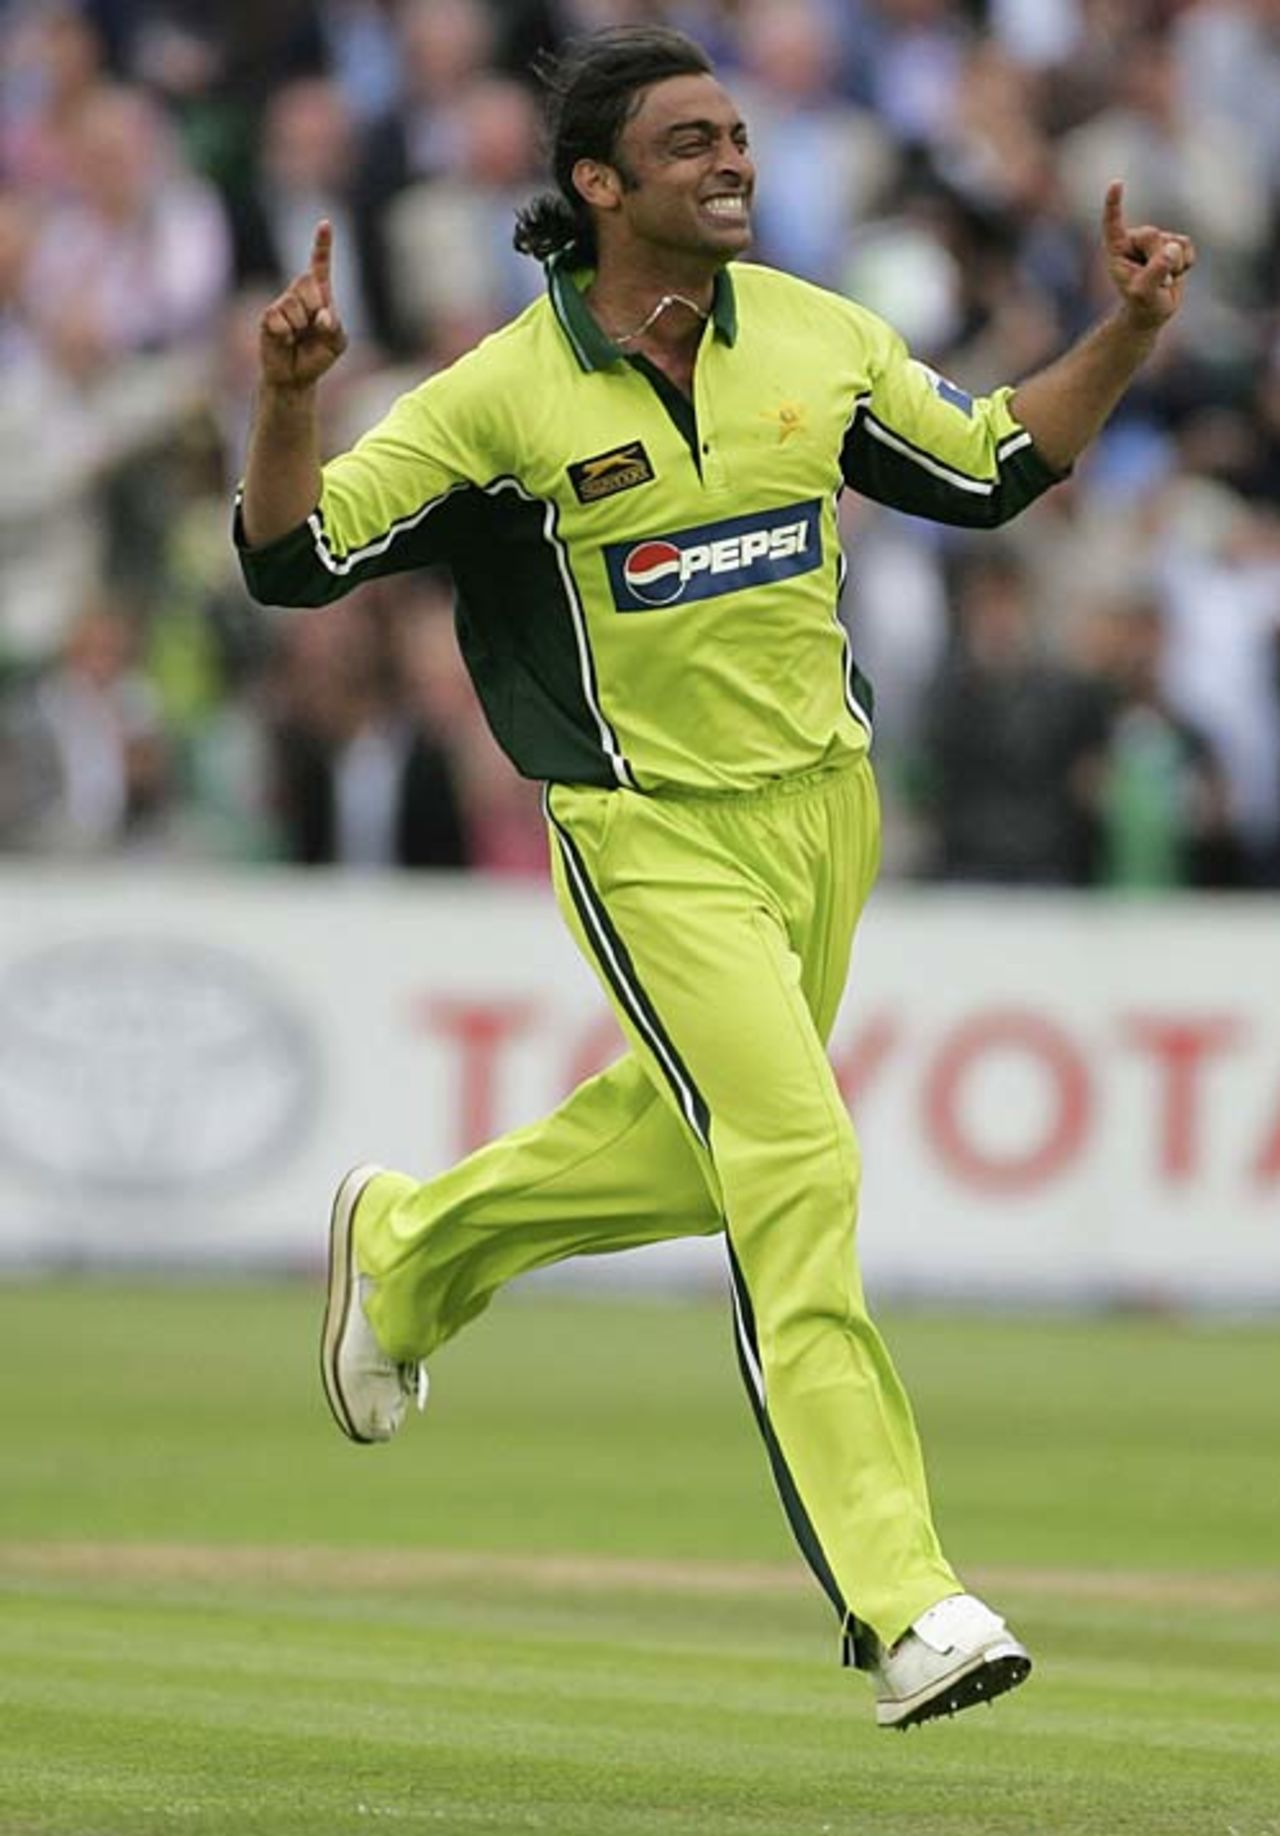 Shoaib Akhtar bowled well on his return from injury for Pakistan